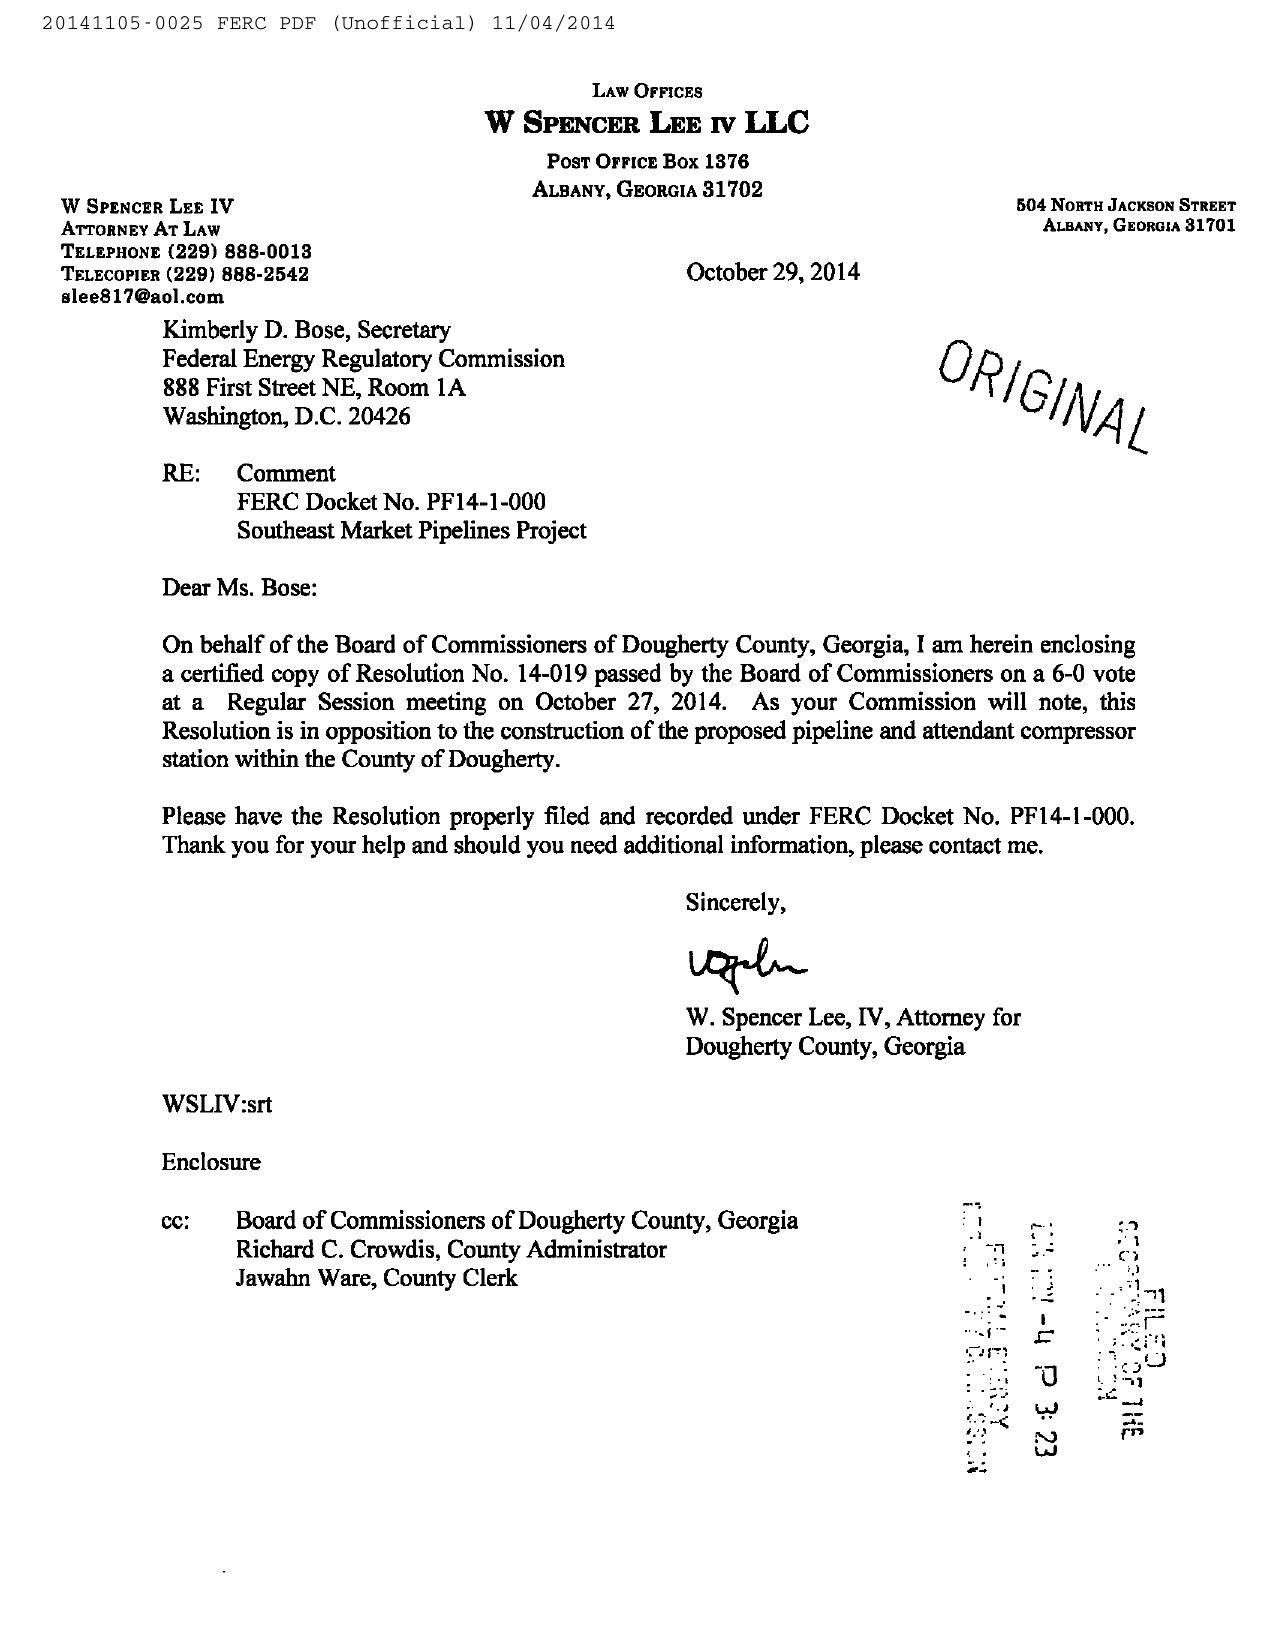 1280x1650 Cover letter, in Resolution No. 14-019 pipeline and compressor station, by Dougherty County Commission, for SpectraBusters.org, 5 November 2014